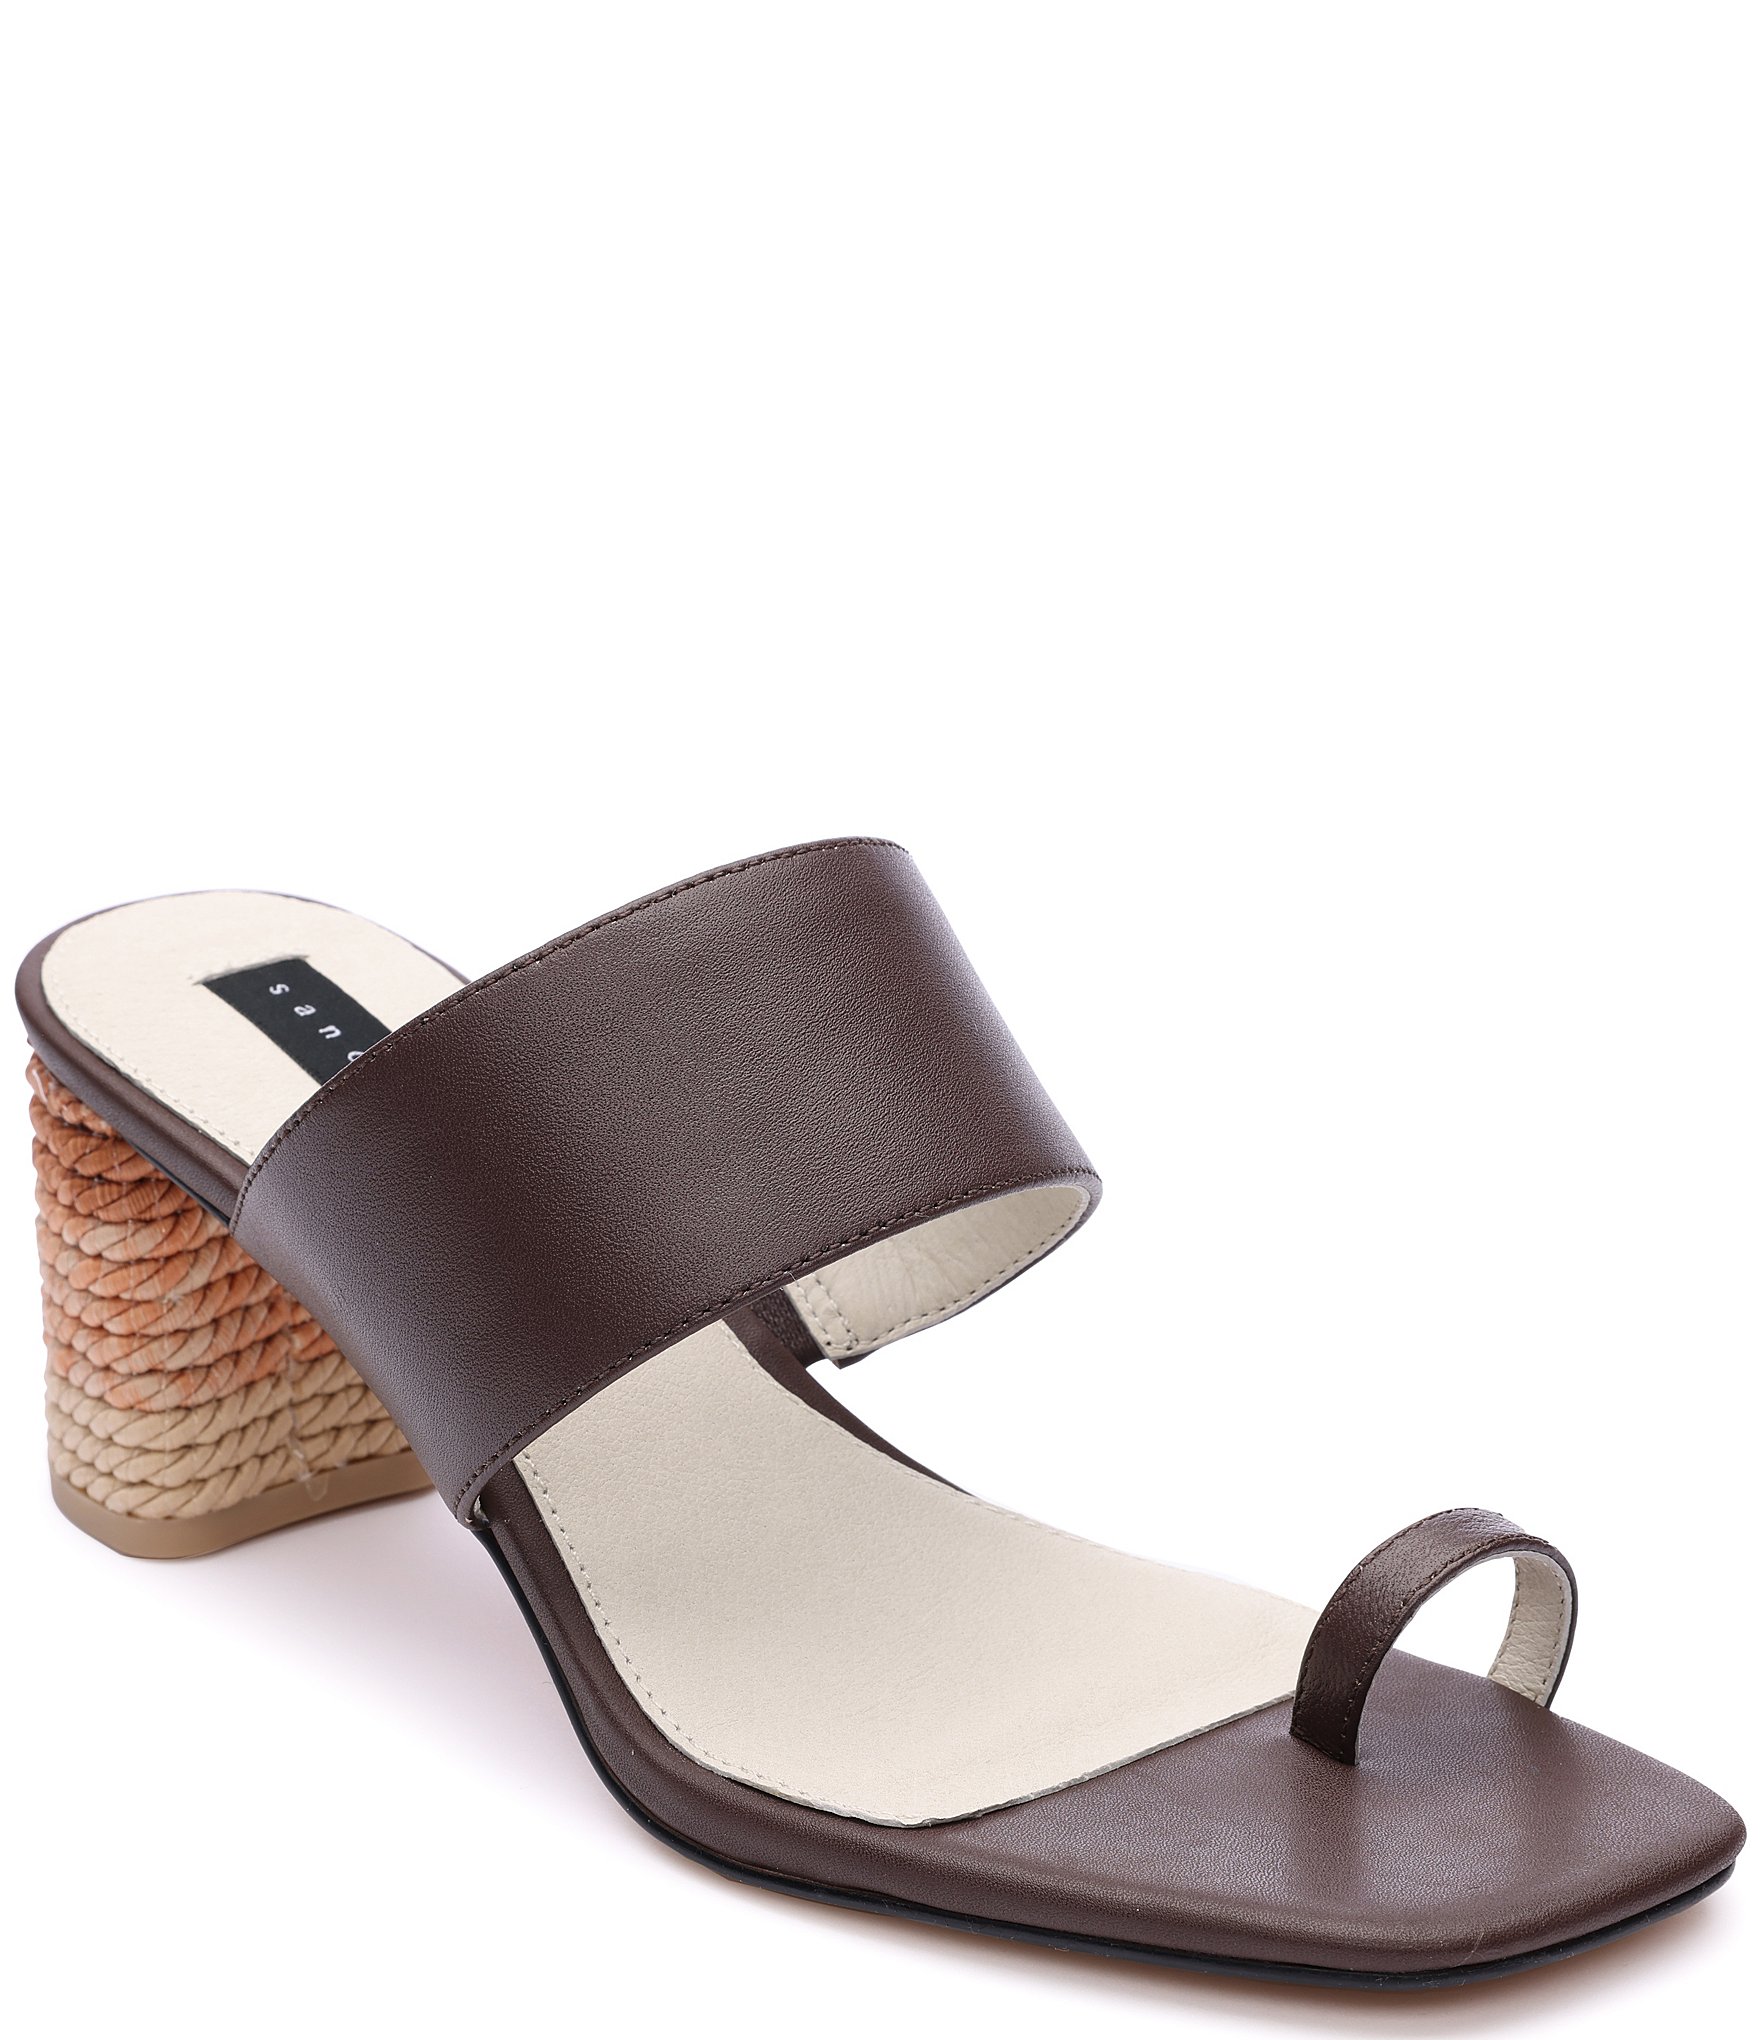 Buy Leather Woven Toe Loop Sandals from the Next UK online shop